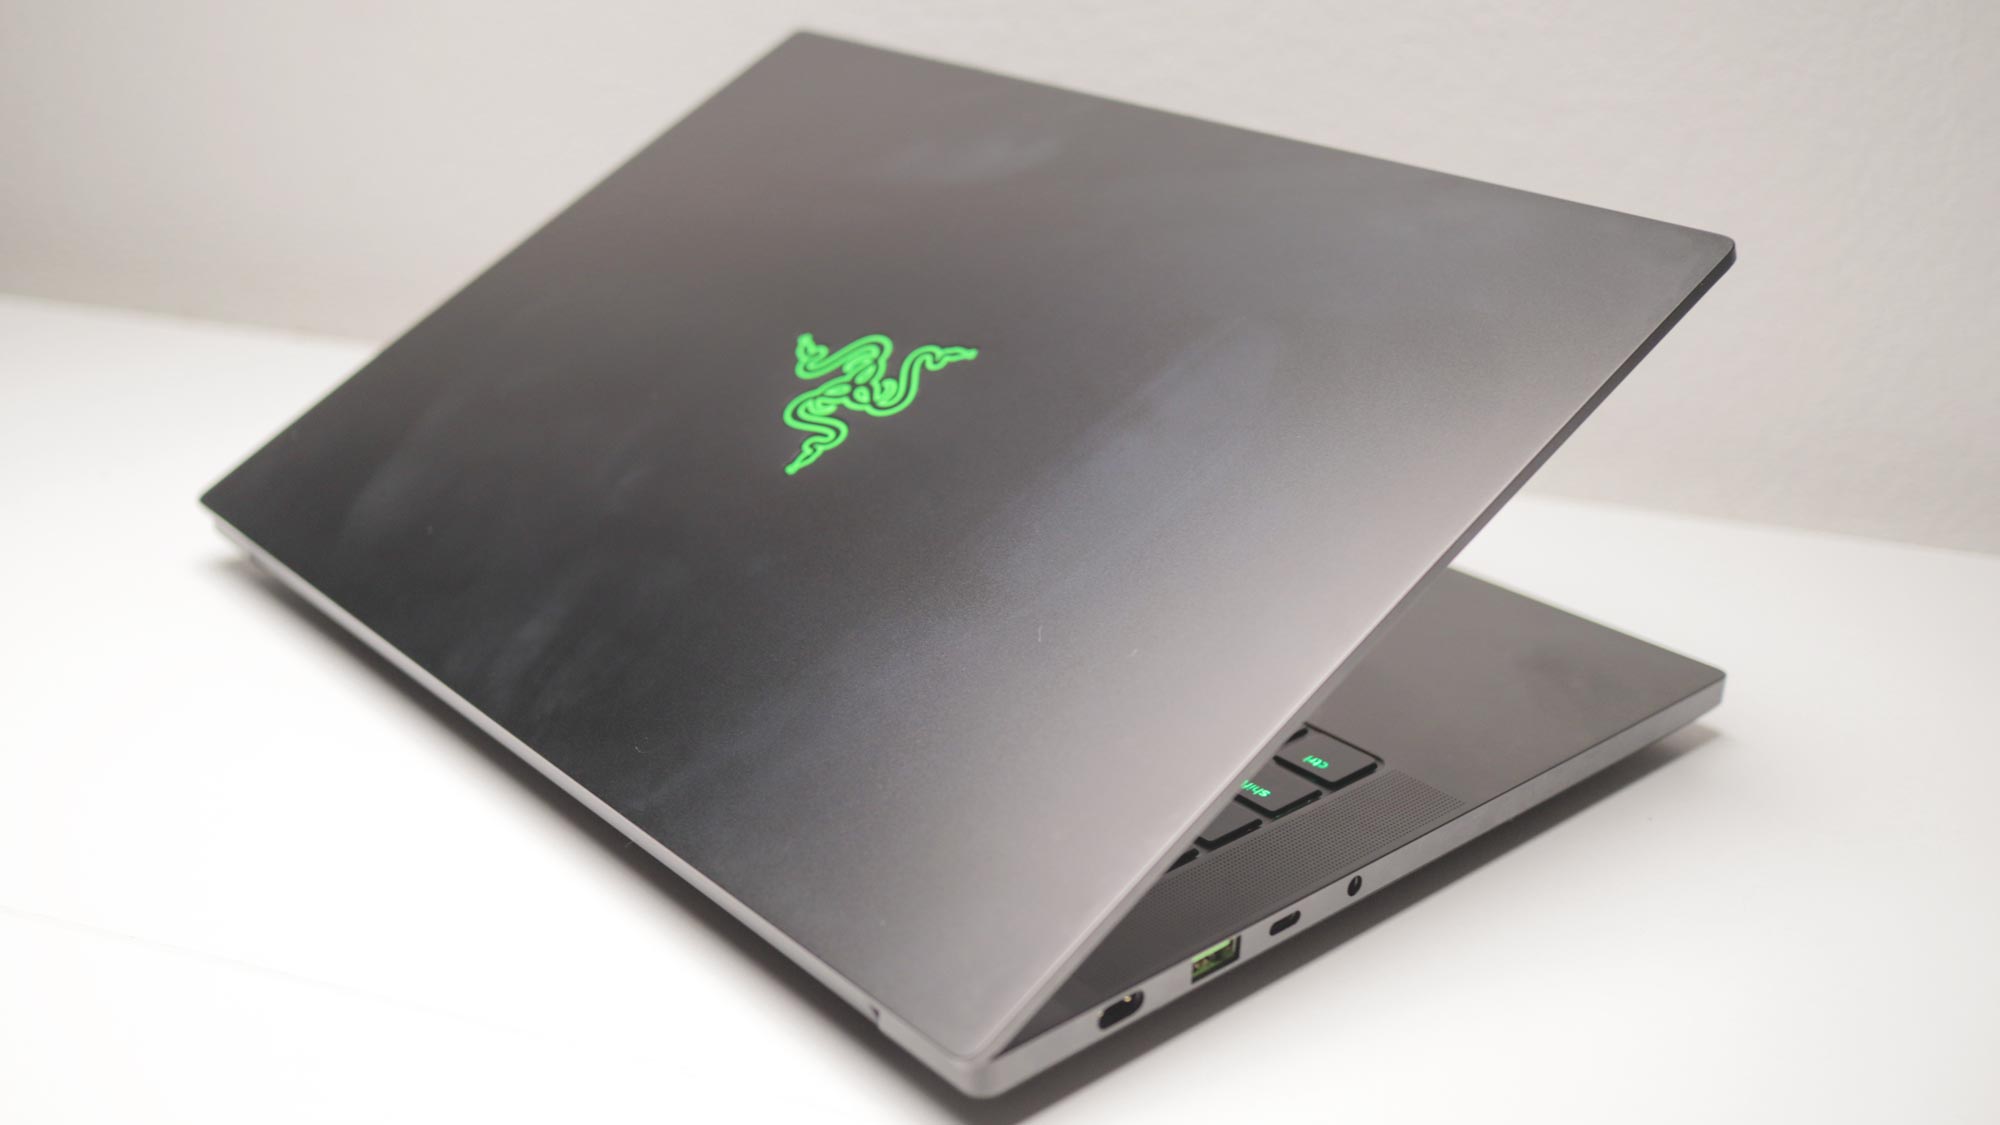 Razer Blade 16 (2023) gaming laptop review: The price of pretty